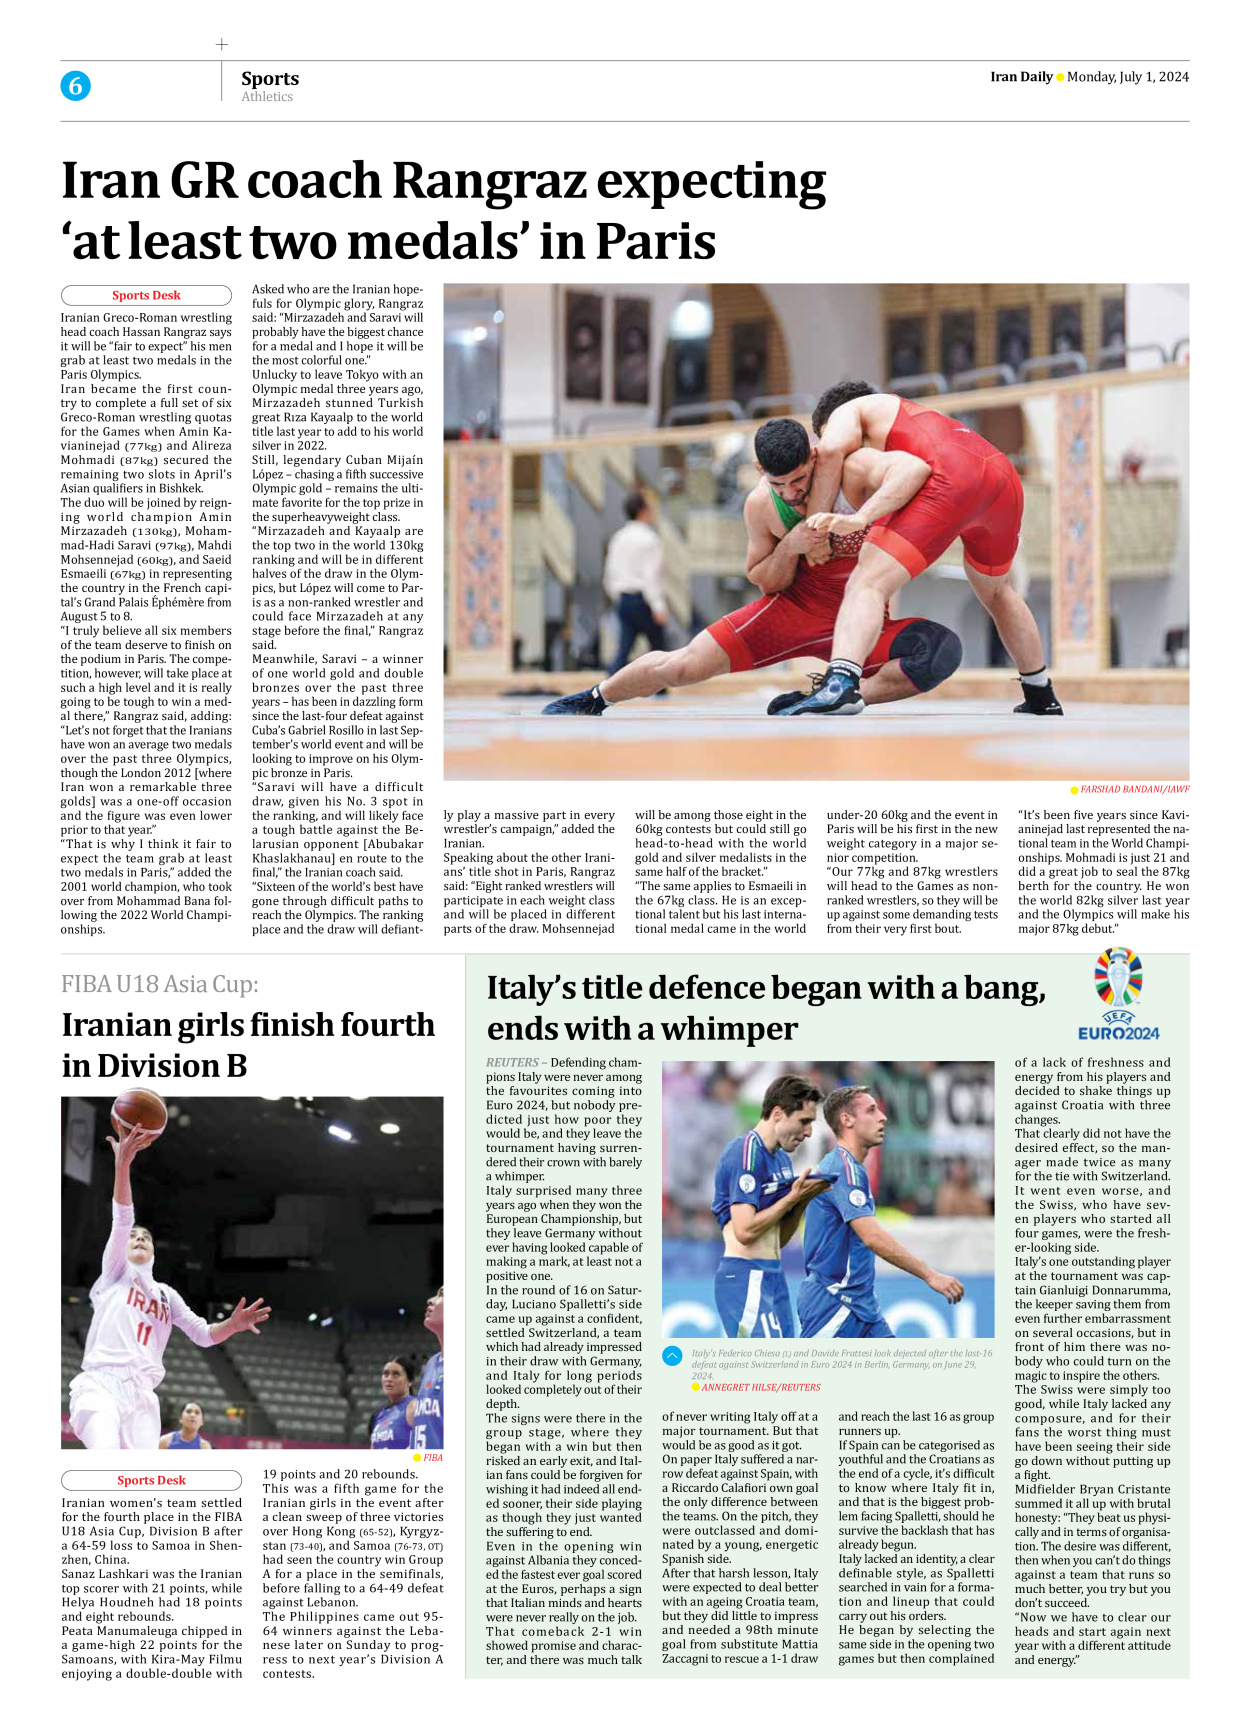 Iran Daily - Number Seven Thousand Five Hundred and Ninety Three - 01 July 2024 - Page 6